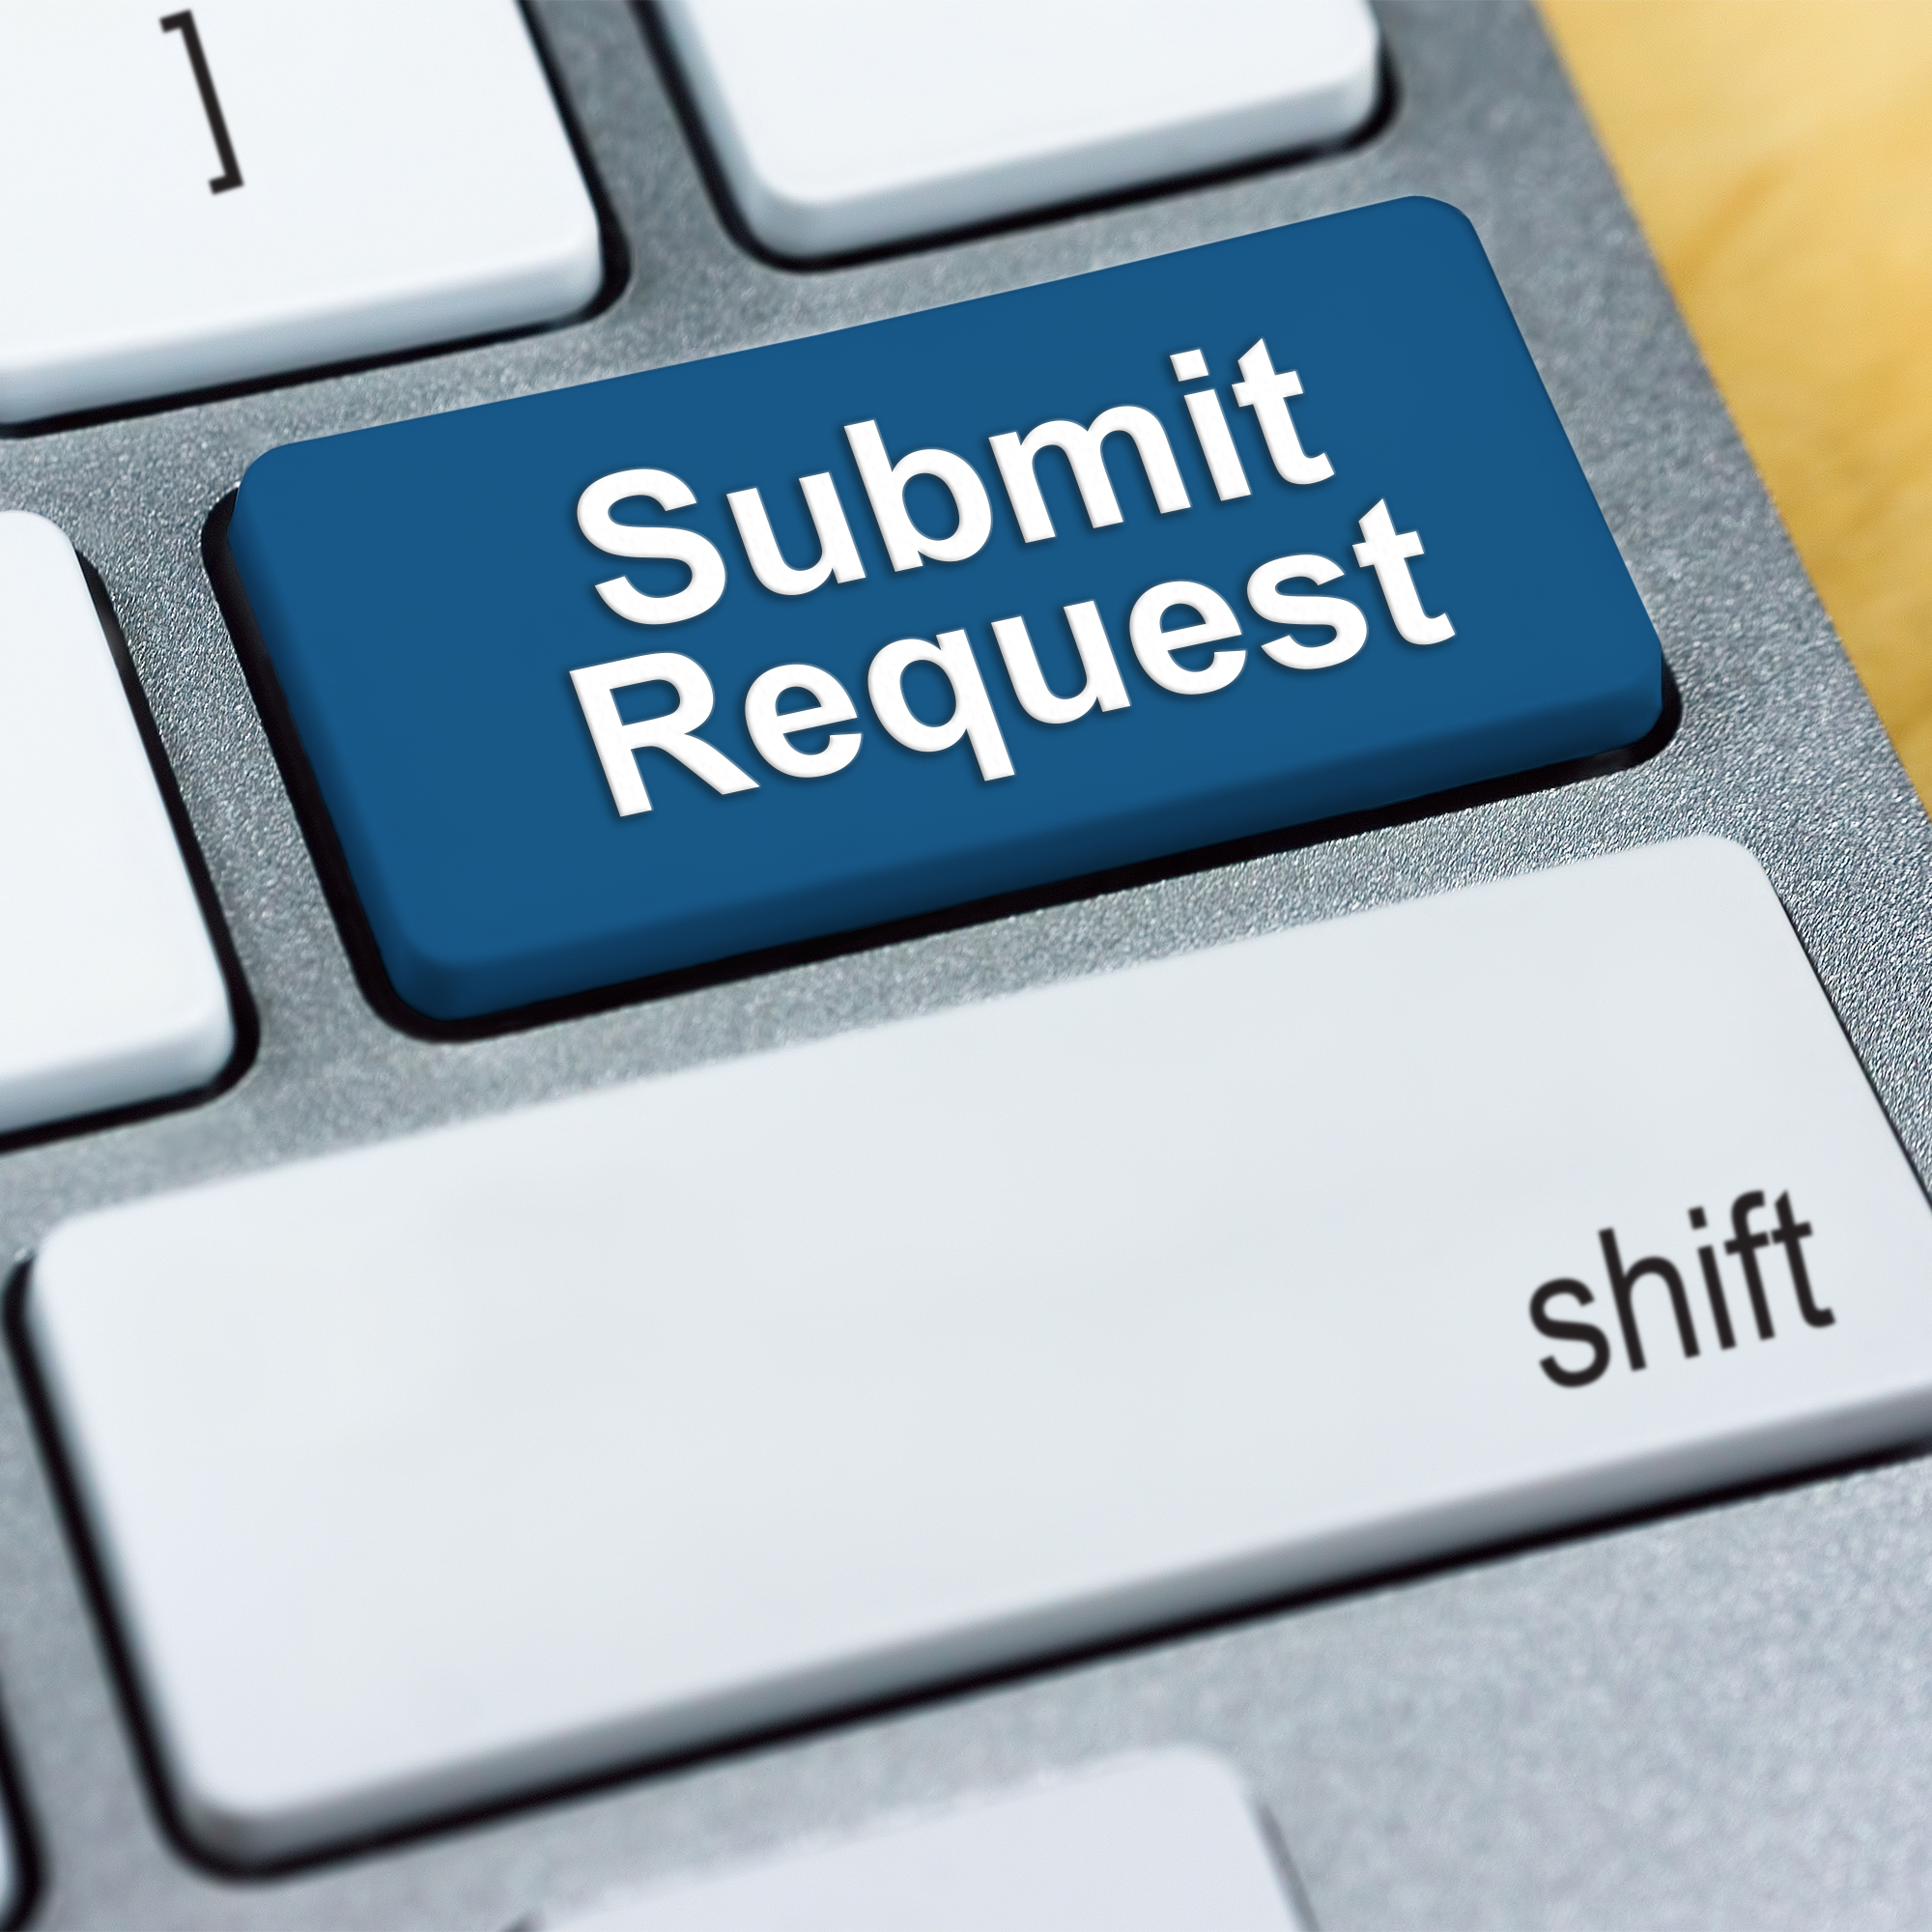 keyboard button that read submit request